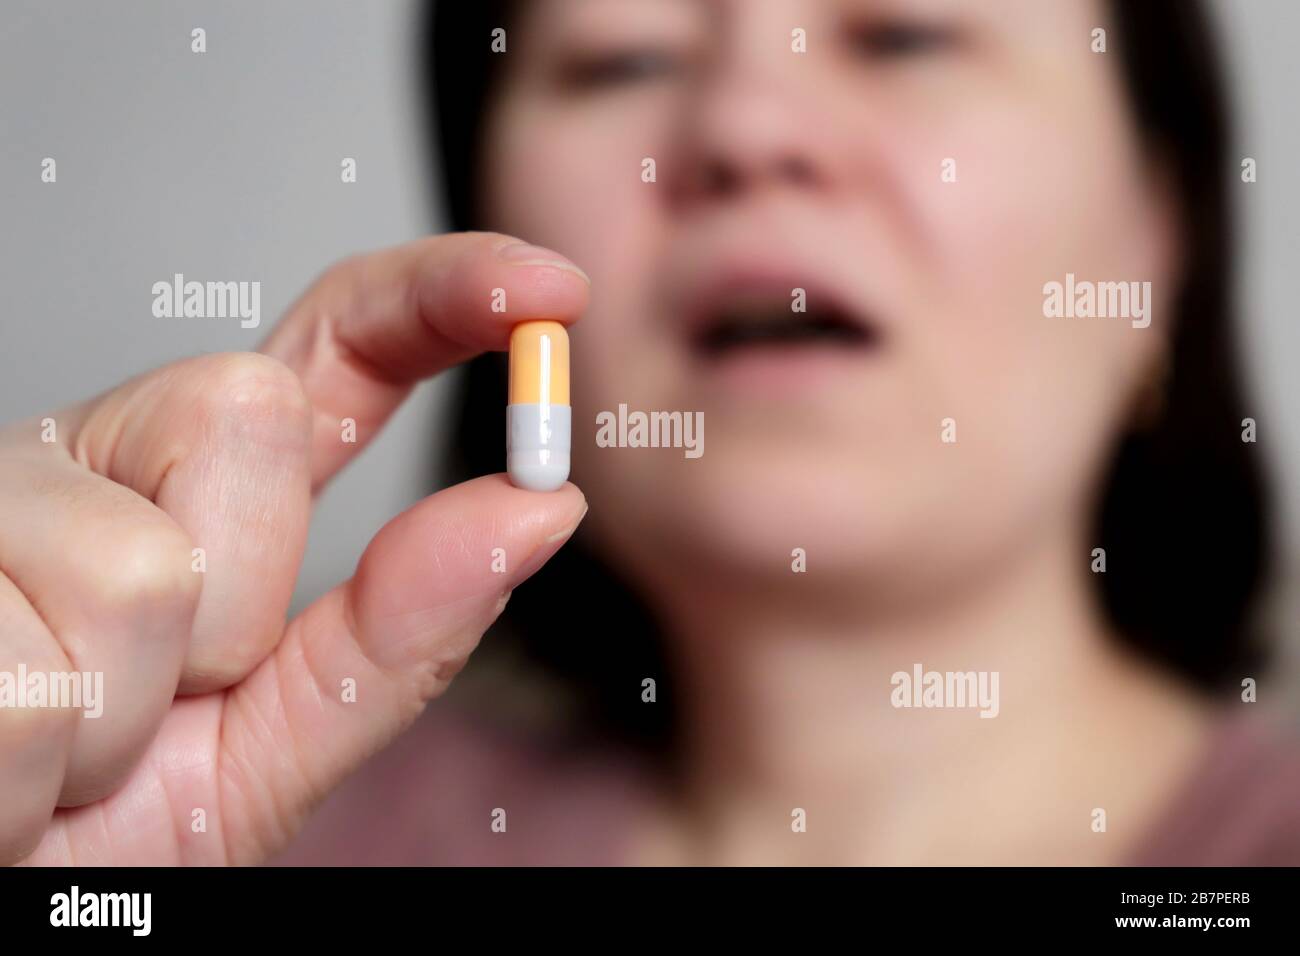 Woman takes a pill, girl putting capsule in open mouth. Sick female taking medicines, concept of antibiotic, vitamin, coronavirus prevention Stock Photo